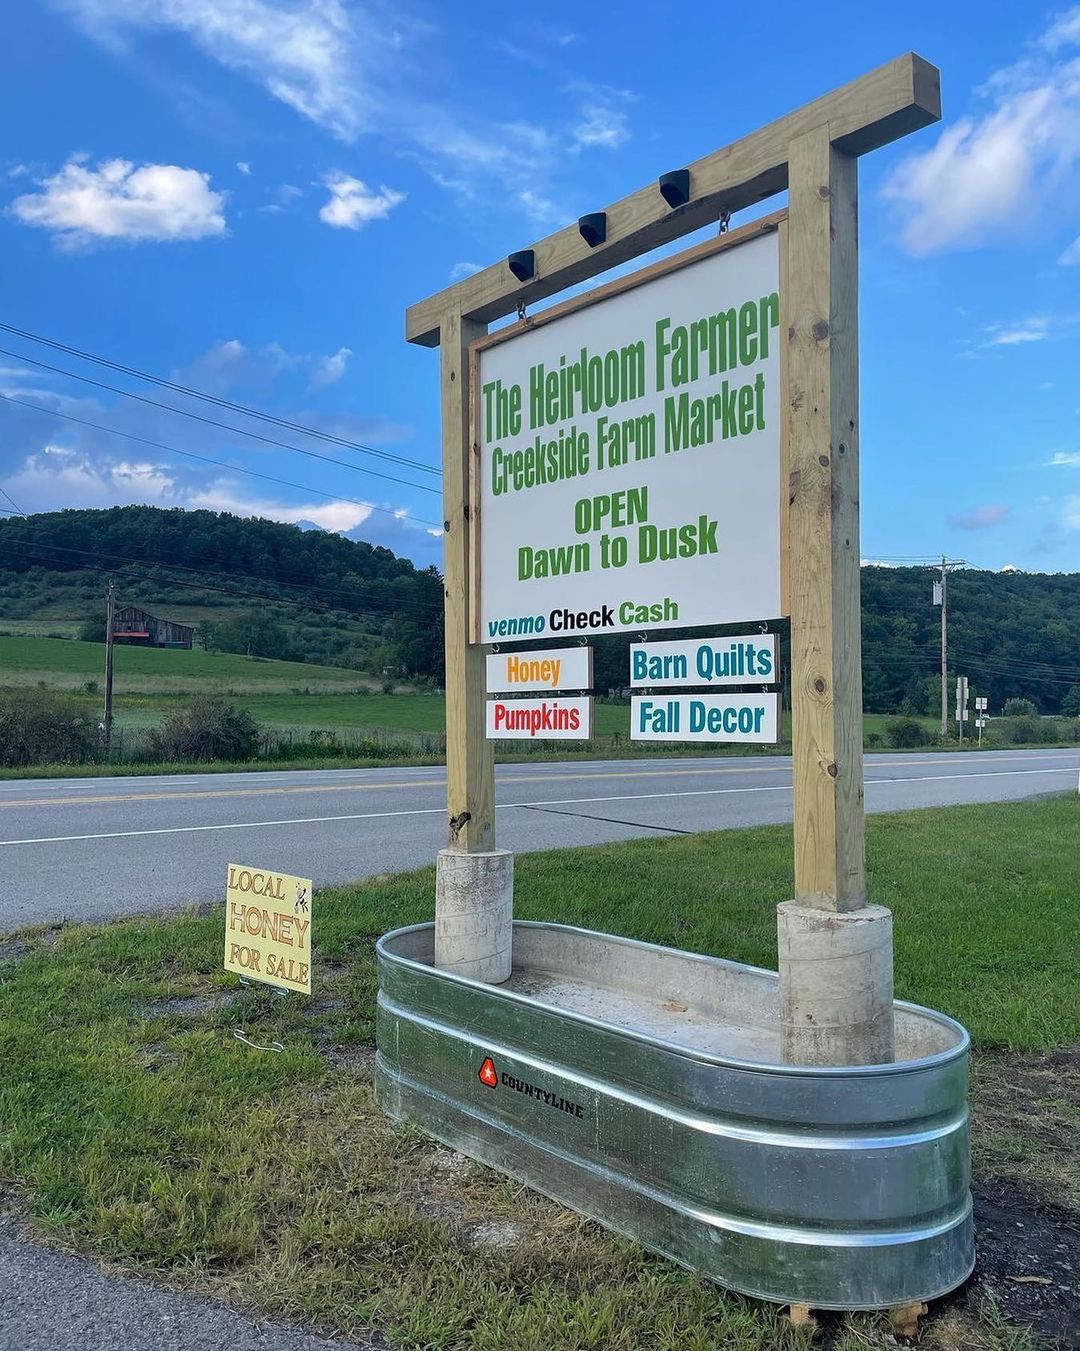 Heirloom vegetables, flowers, herbs and local honey, along with hand-crafted items, are among the finds at this family farm stand located off of Eagle Valley Road in Port Matilda. 